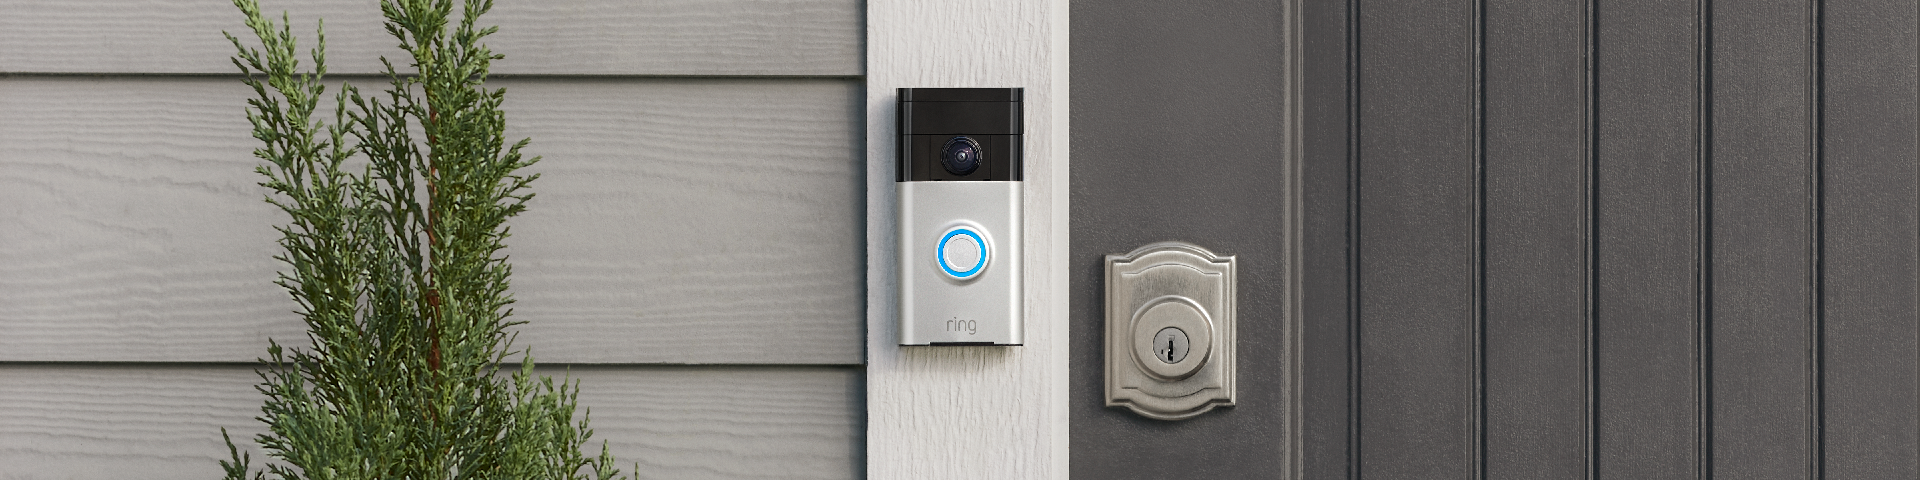 Amazon's Ring wanted to use 911 calls to activate its video doorbells - CNET